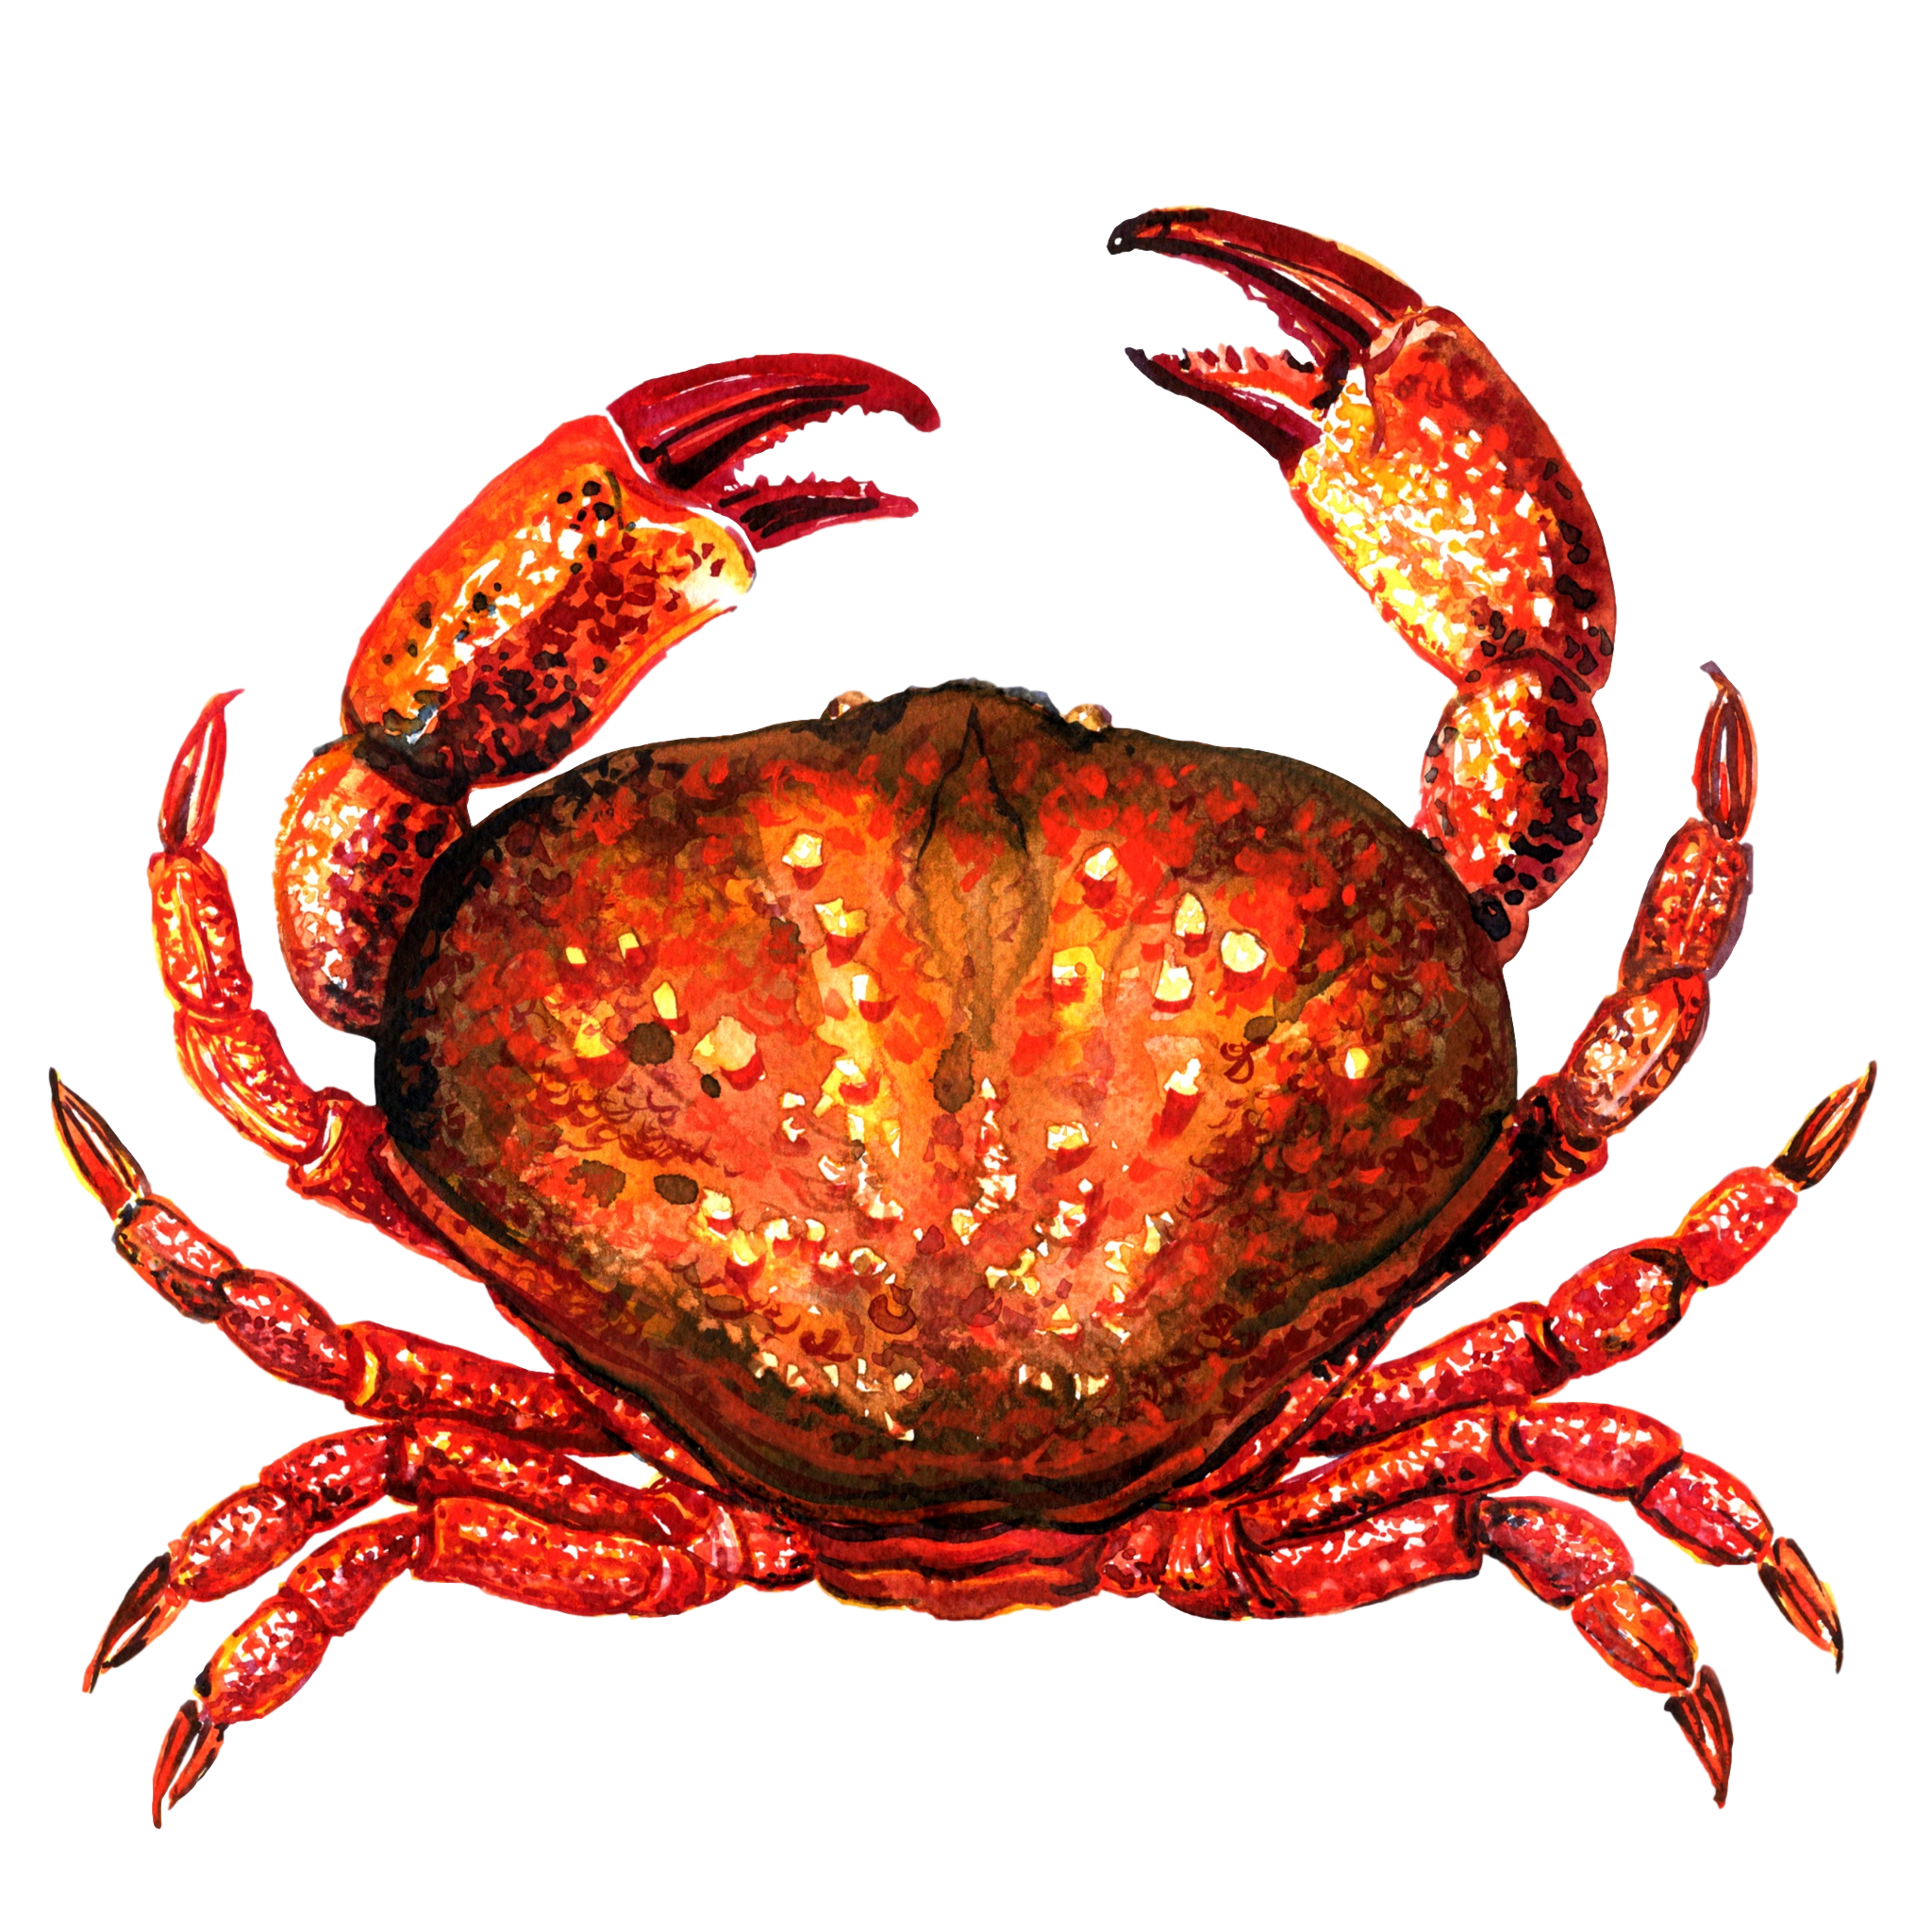 file crab for taiapure wikimedia commons #34513